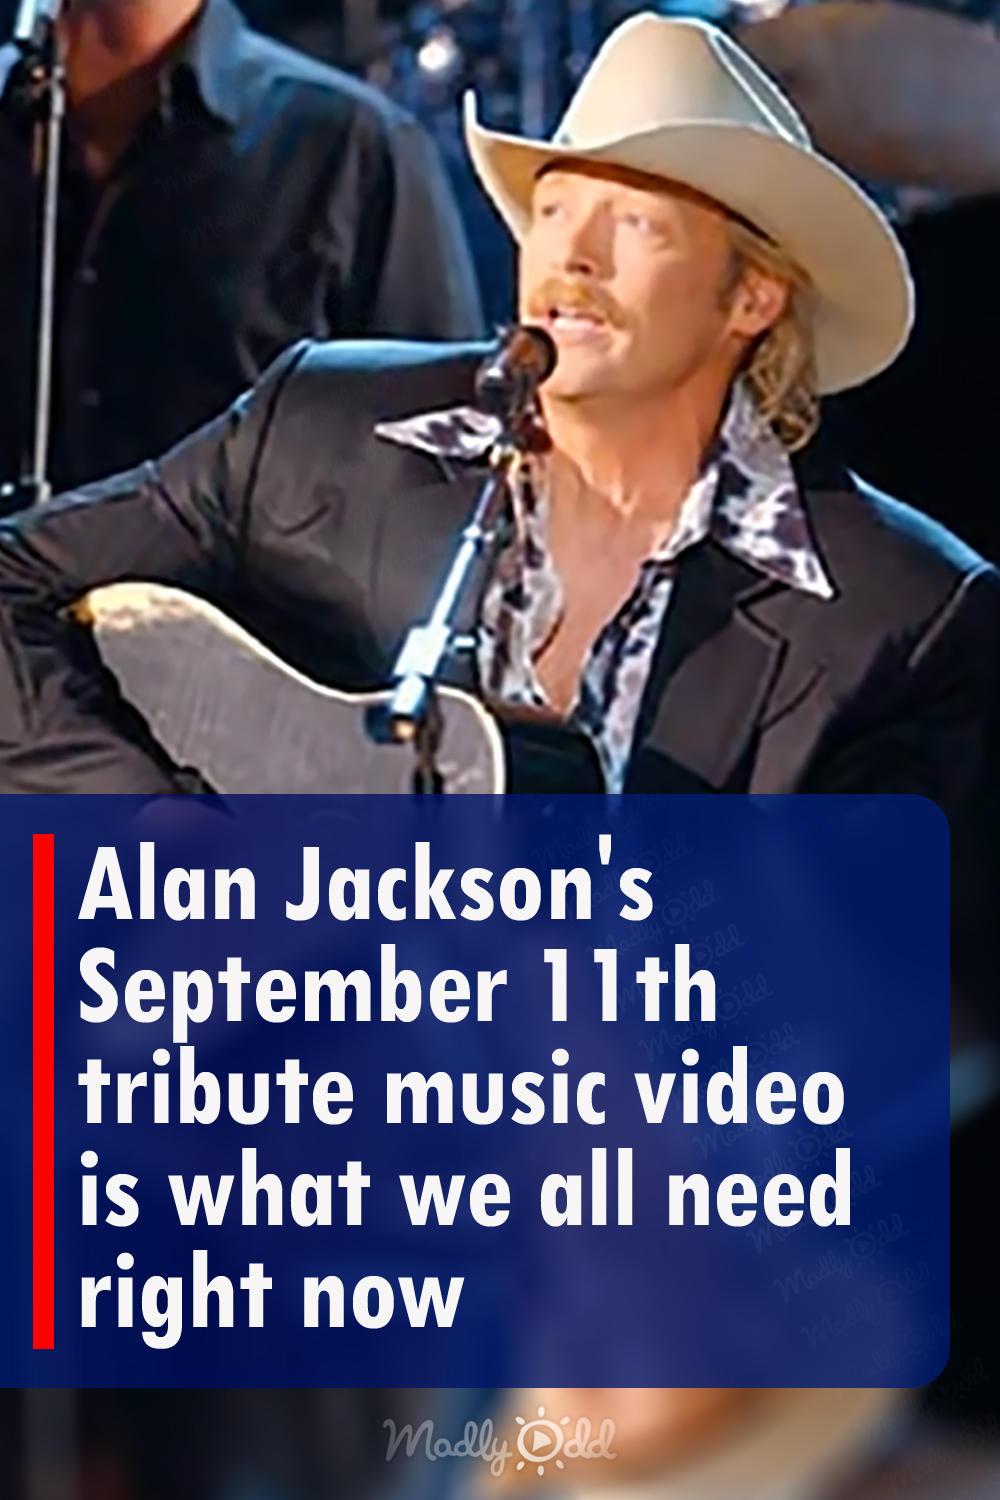 Alan Jackson\'s September 11th tribute music video is what we all need right now